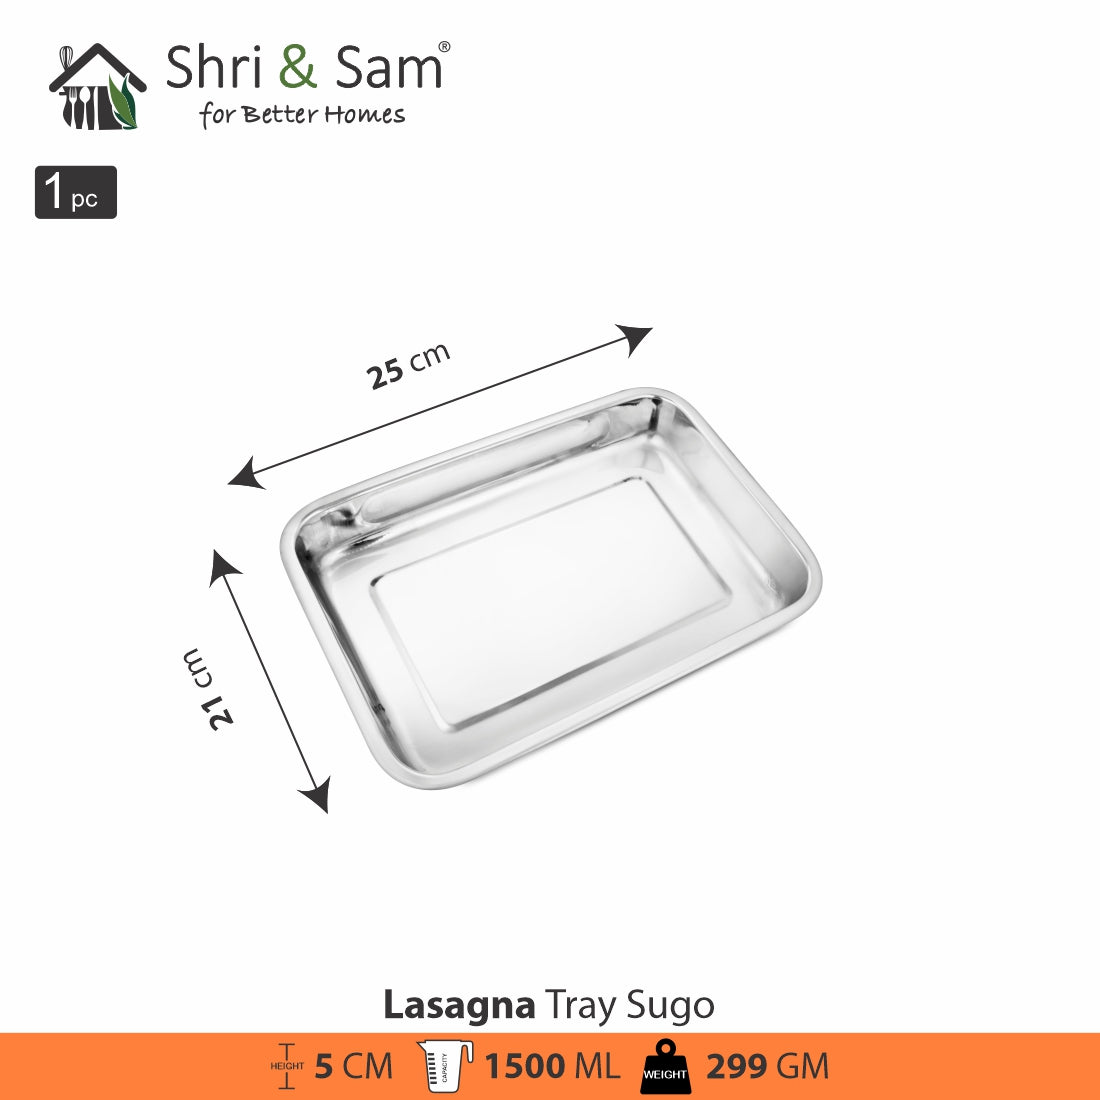 Stainless Steel Lasagna Tray Sugo